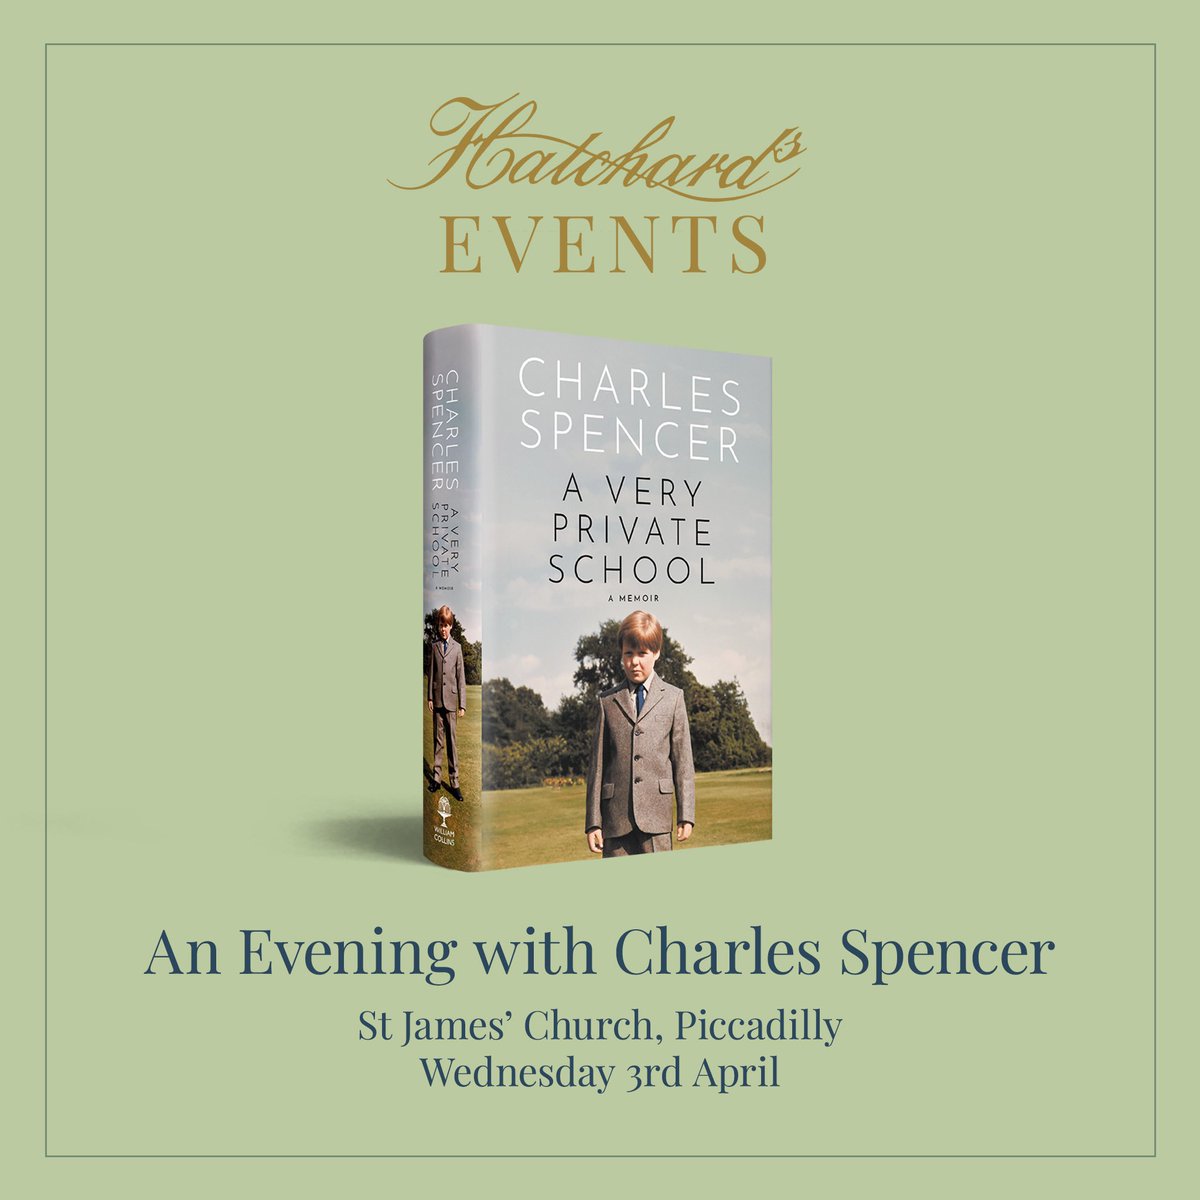 .@cspencer1508 talks to @JPicardie about his childhood memoir #AVeryPrivateSchool in a @Hatchards event at St James’ Church Piccadilly #London tonight